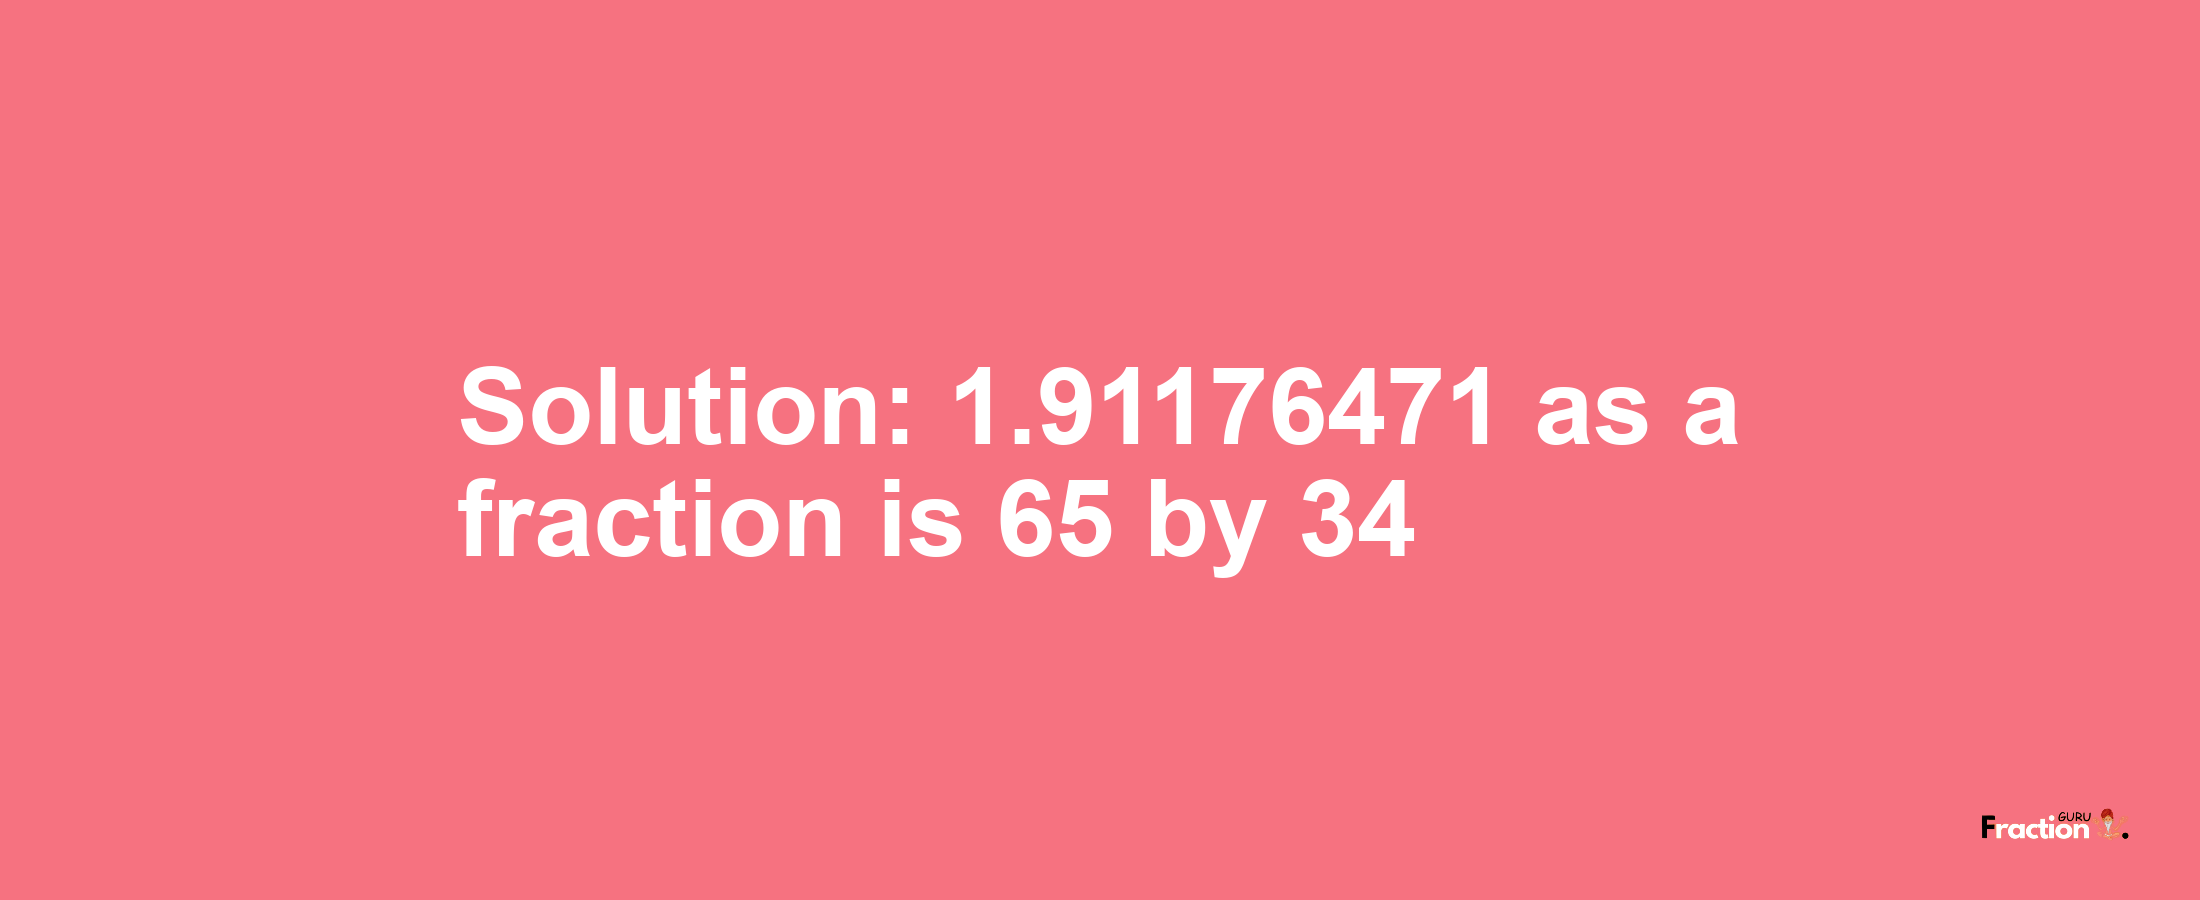 Solution:1.91176471 as a fraction is 65/34